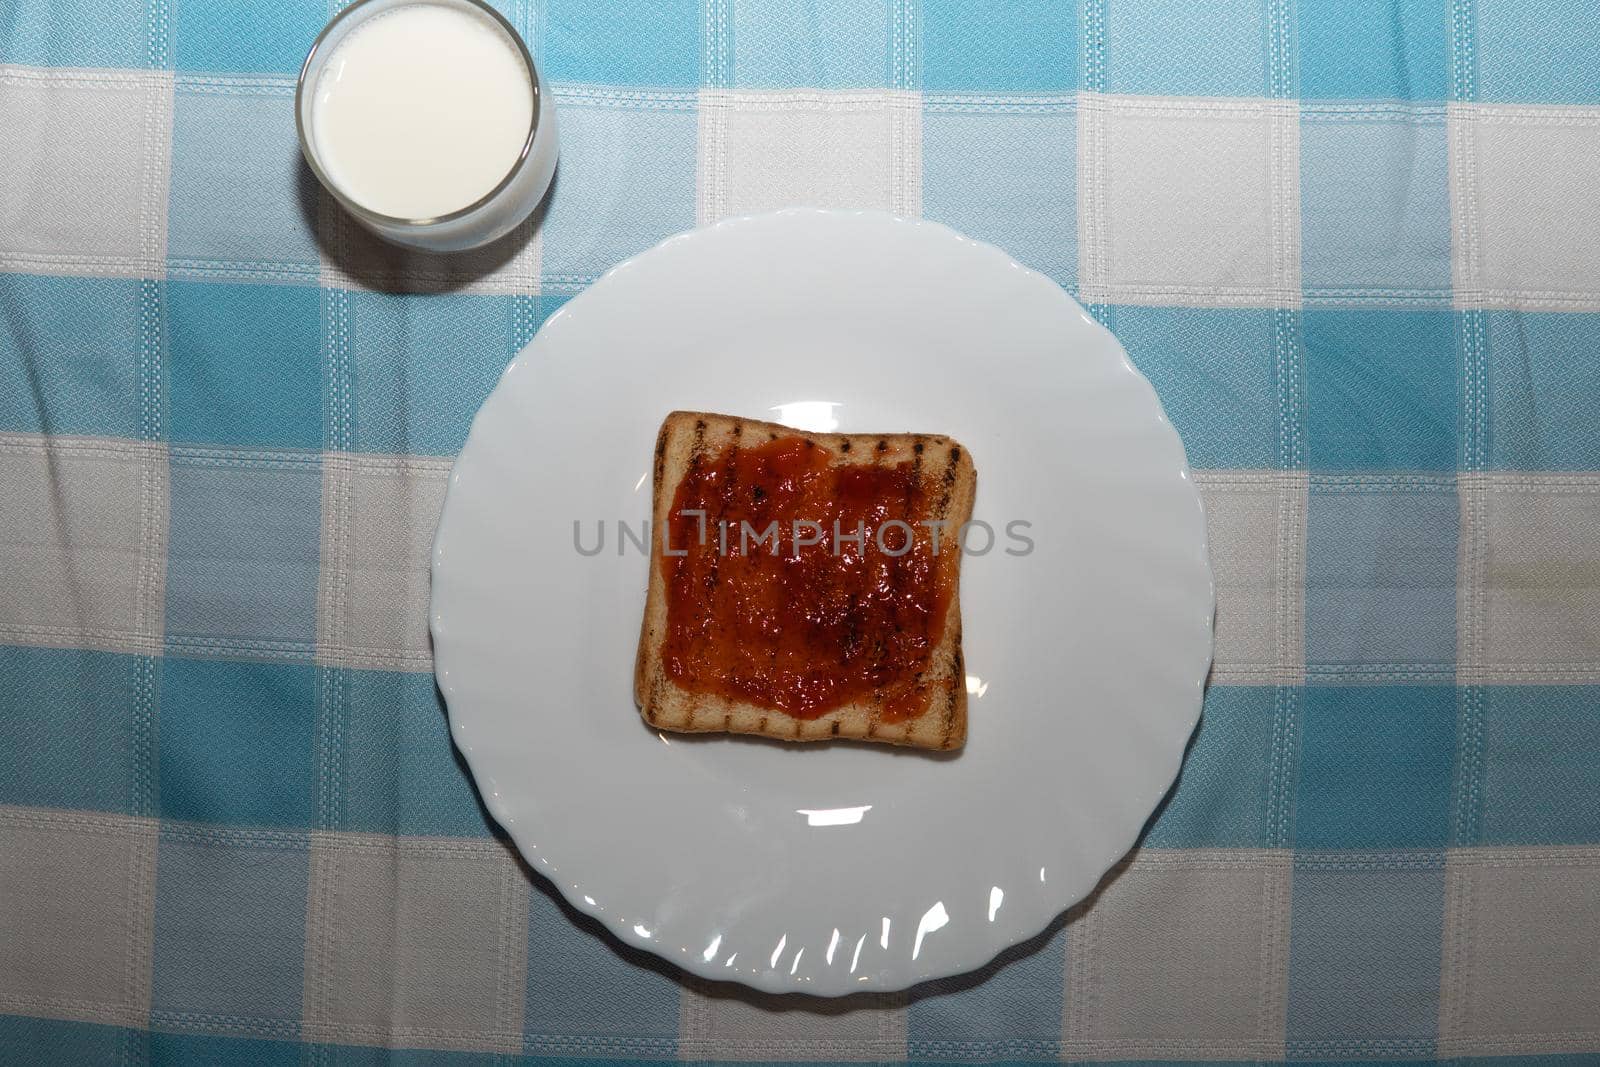 Toasted sliced bread with strawberry jam, a glass of milk and blue checkered fondant.